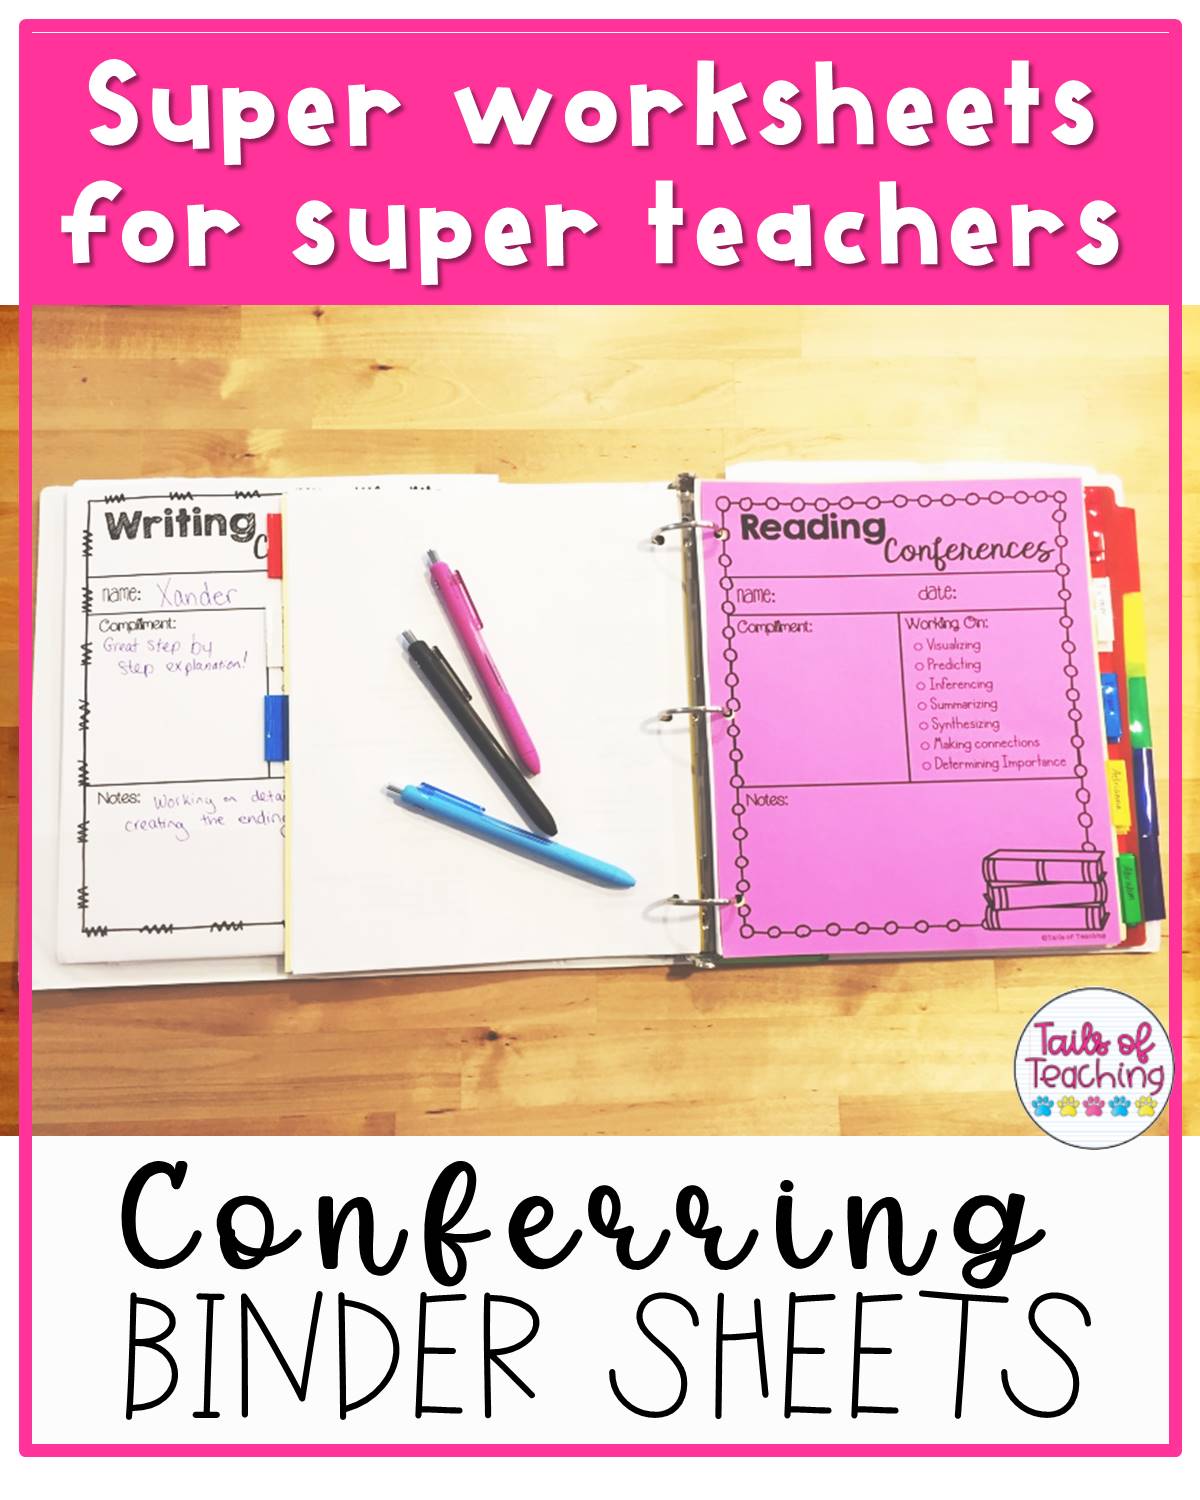 tails-of-teaching-super-worksheets-for-super-teachers